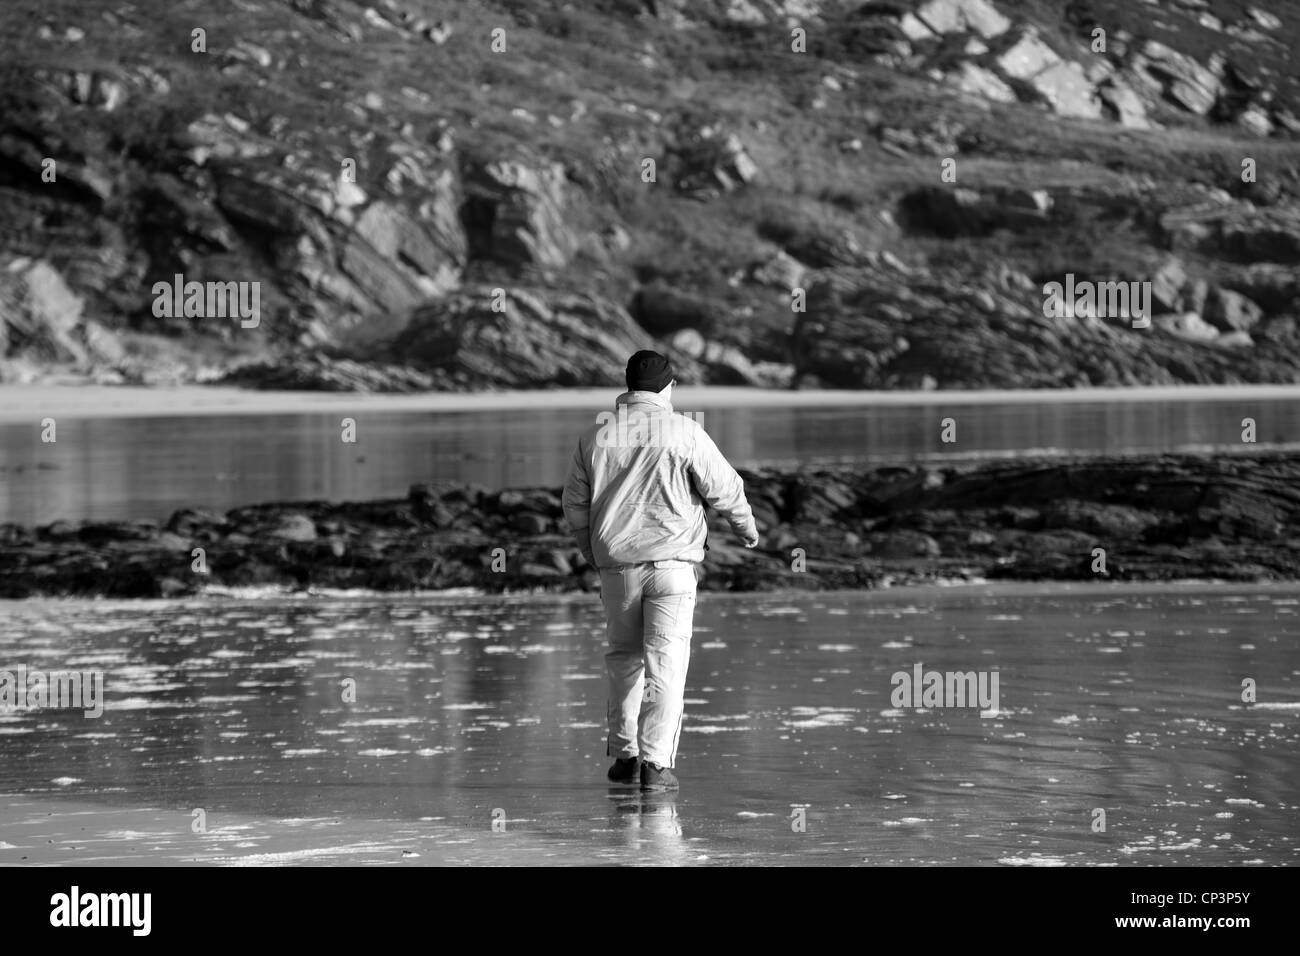 Black & white shot of man with outdoor clothing on crossing a beach just after the tide has gone out Stock Photo